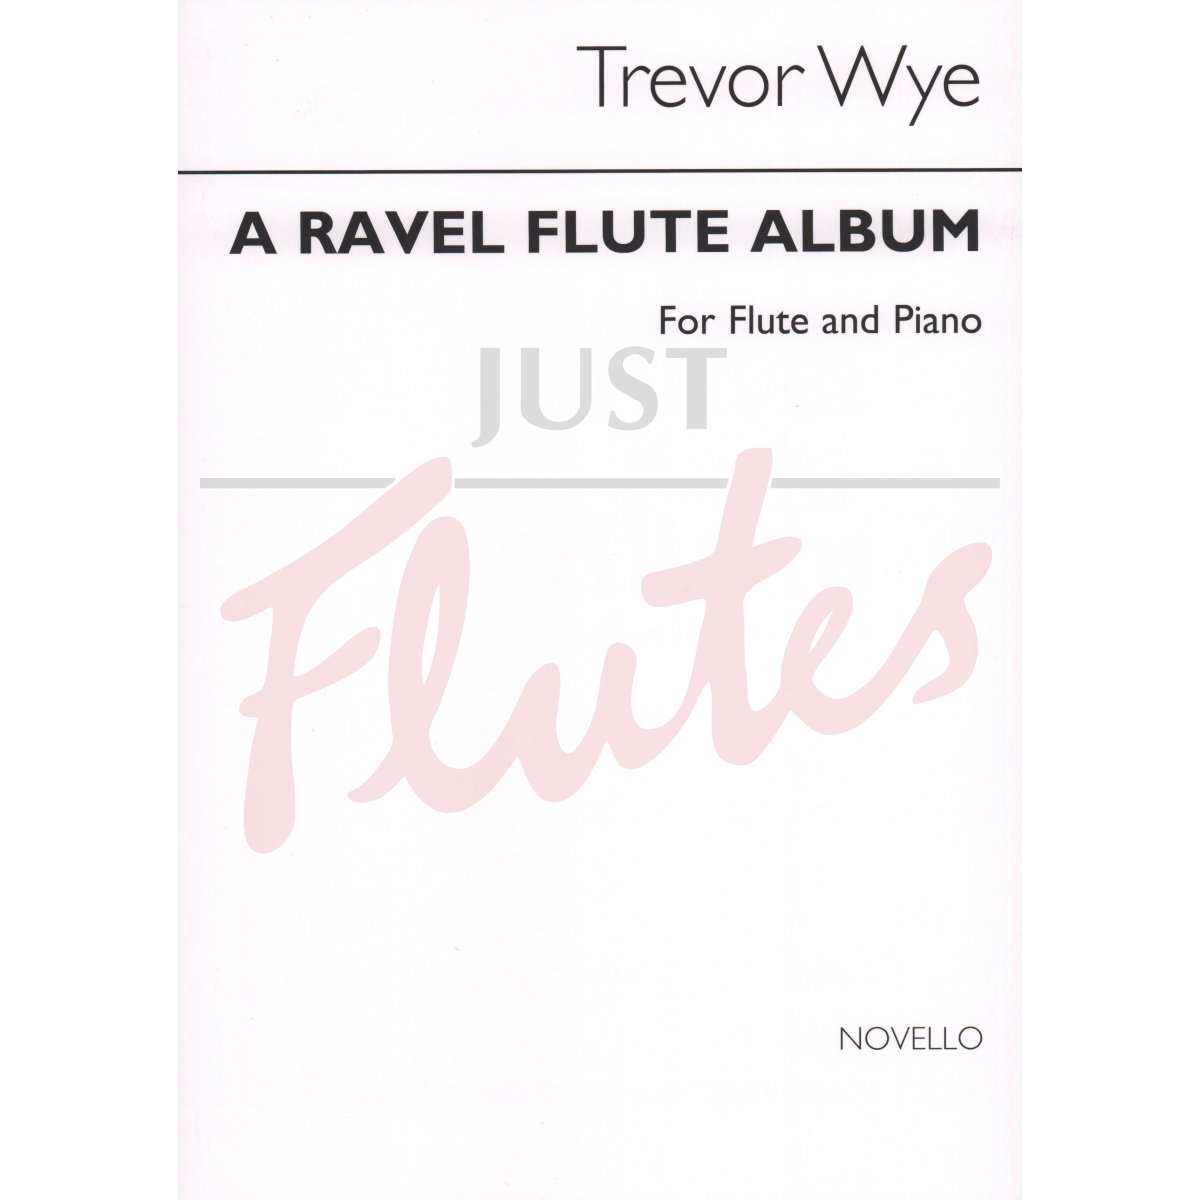 A Ravel Flute Album for Flute and Piano